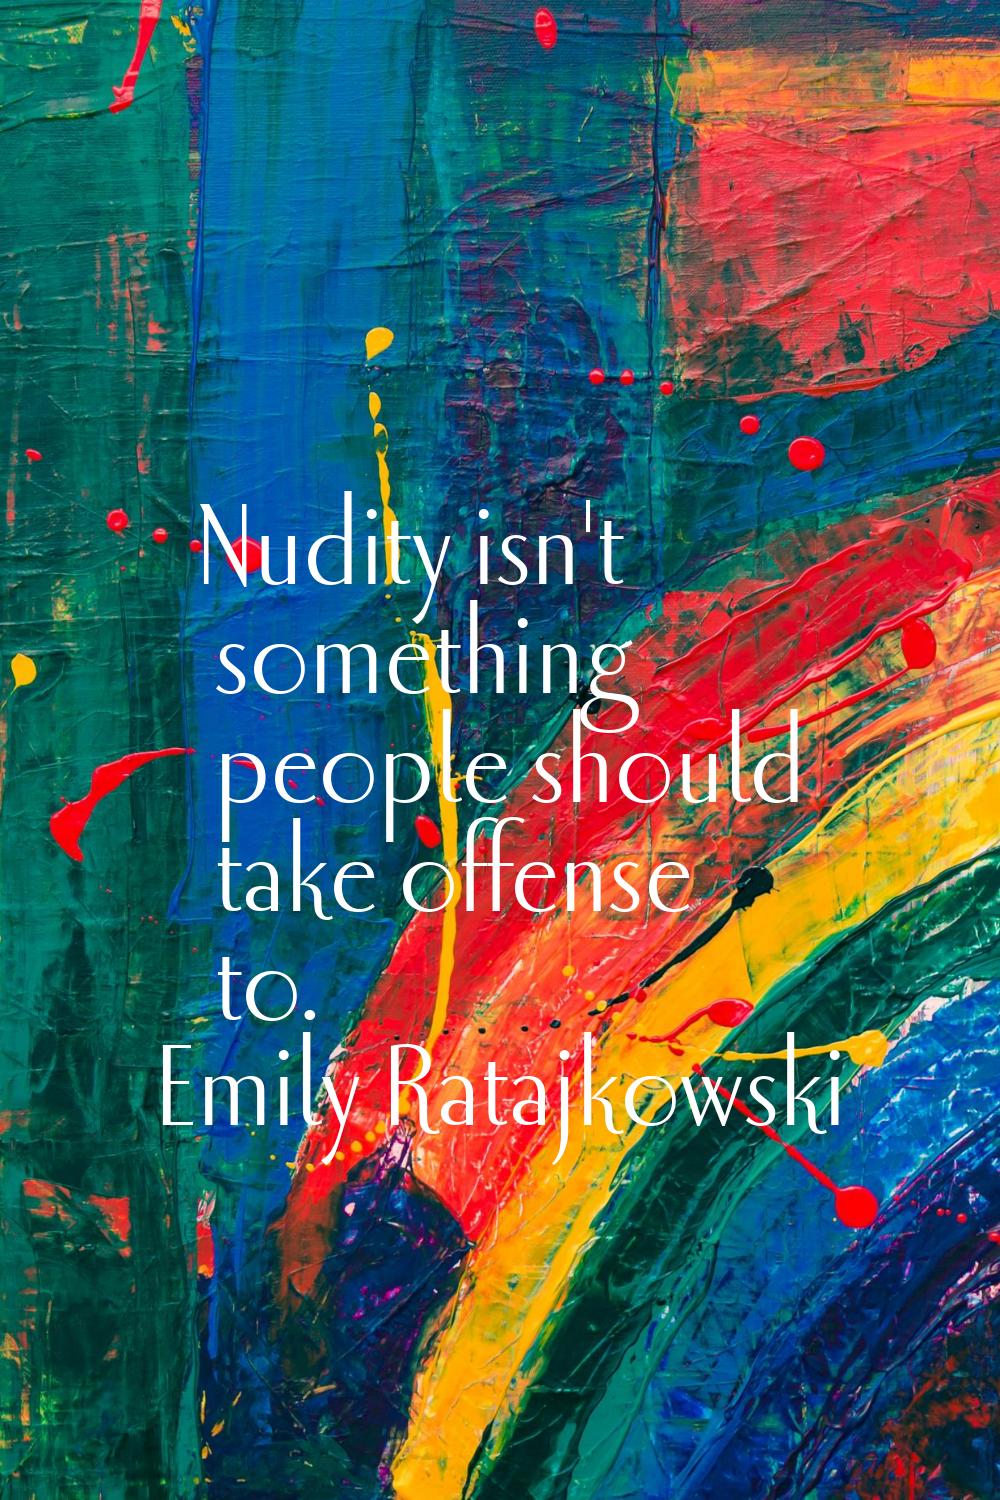 Nudity isn't something people should take offense to.